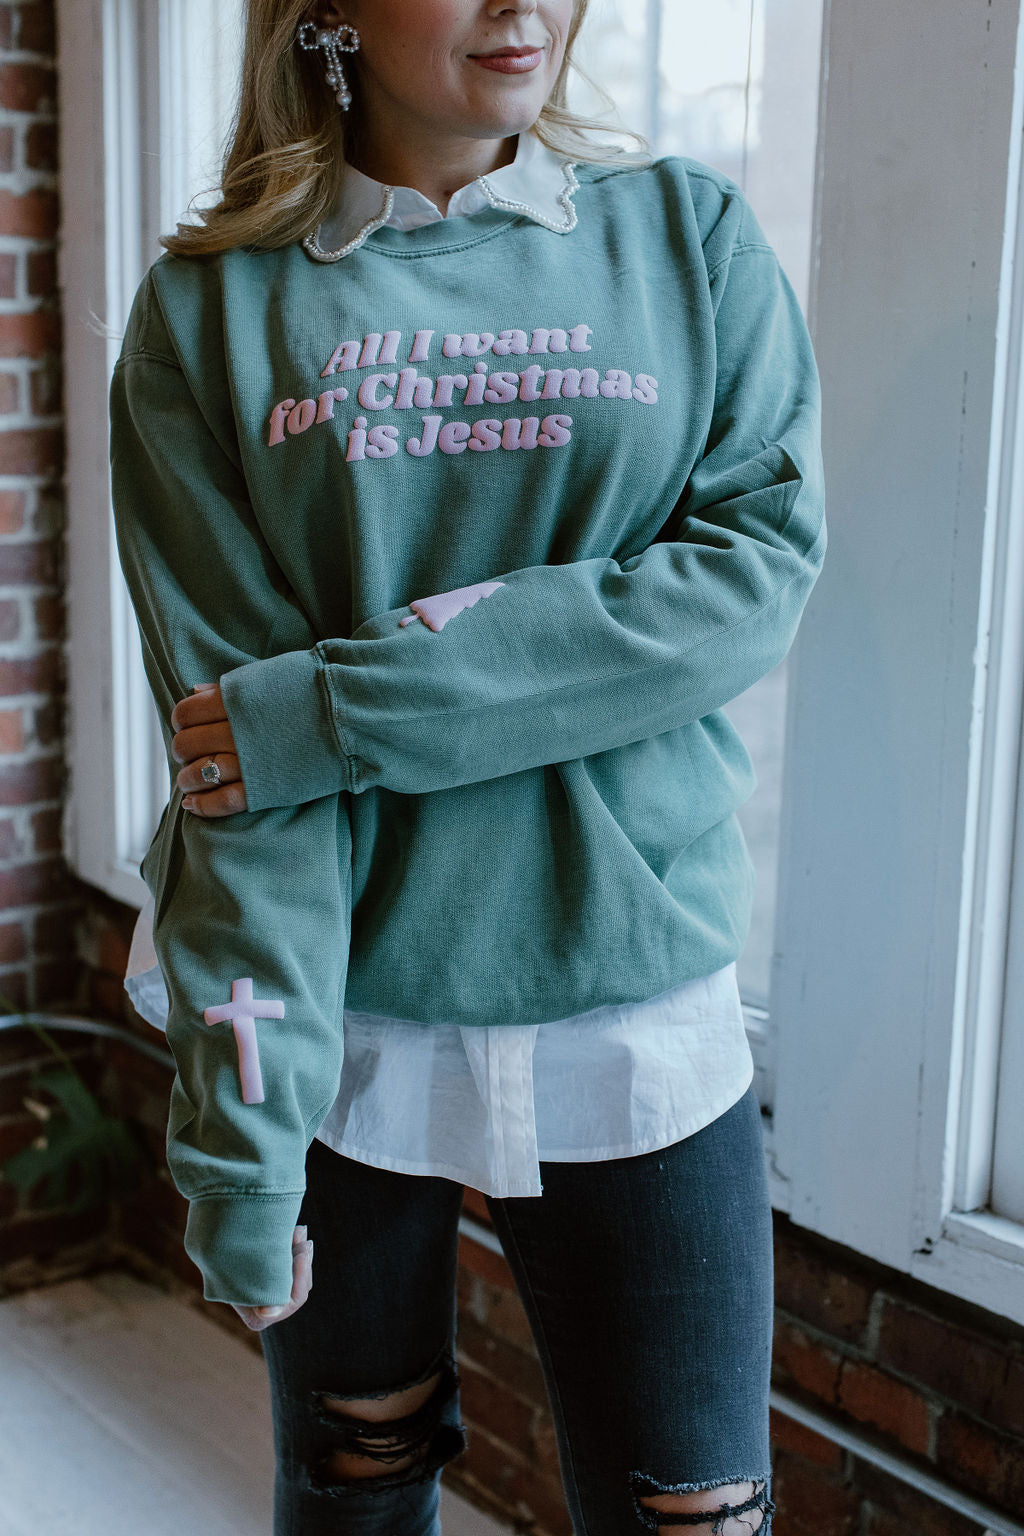 All I want for Christmas is Jesus - Adult Crewneck - Little & Brave